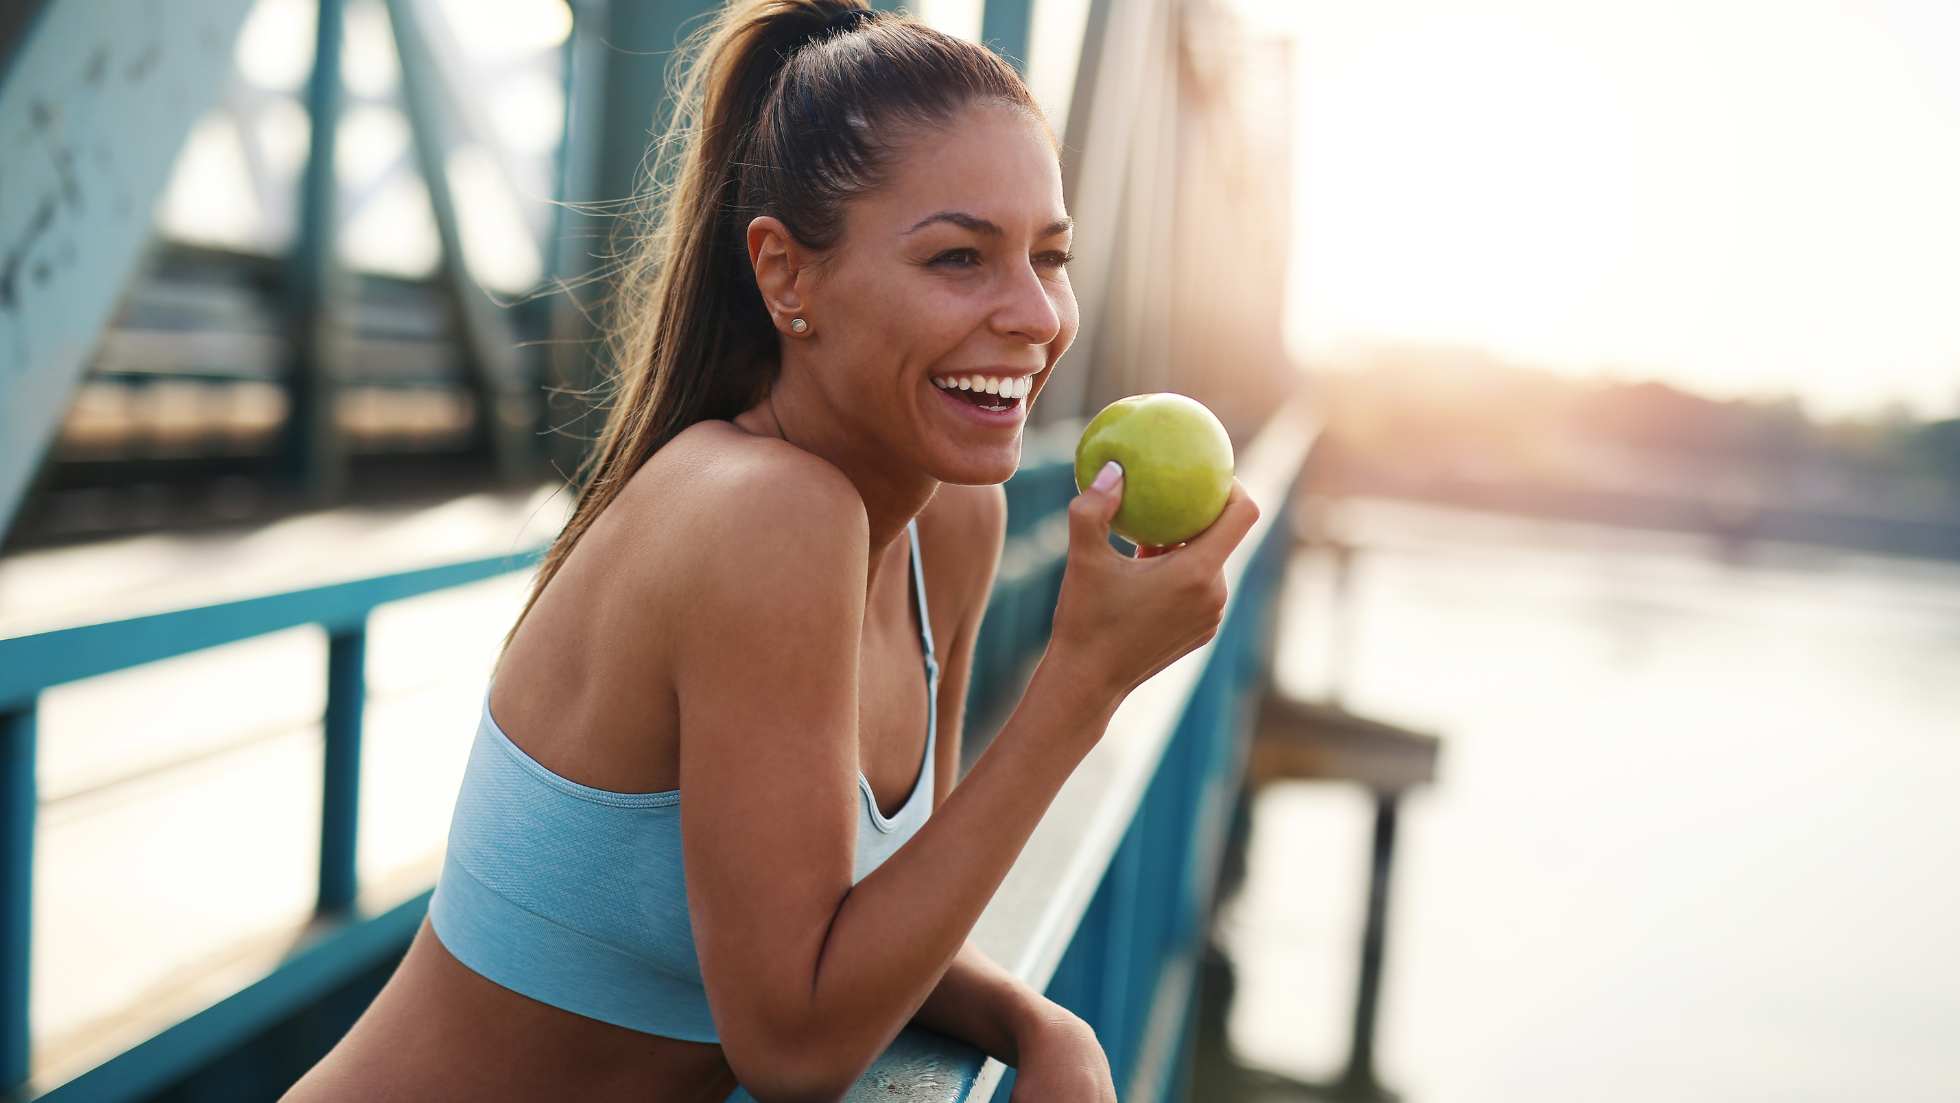 A joyful woman wearing a light blue sports bra is seated on a bridge railing, holding a green apple. With her hair tied back and a radiant smile, she represents a vibrant image of health and wellness. 